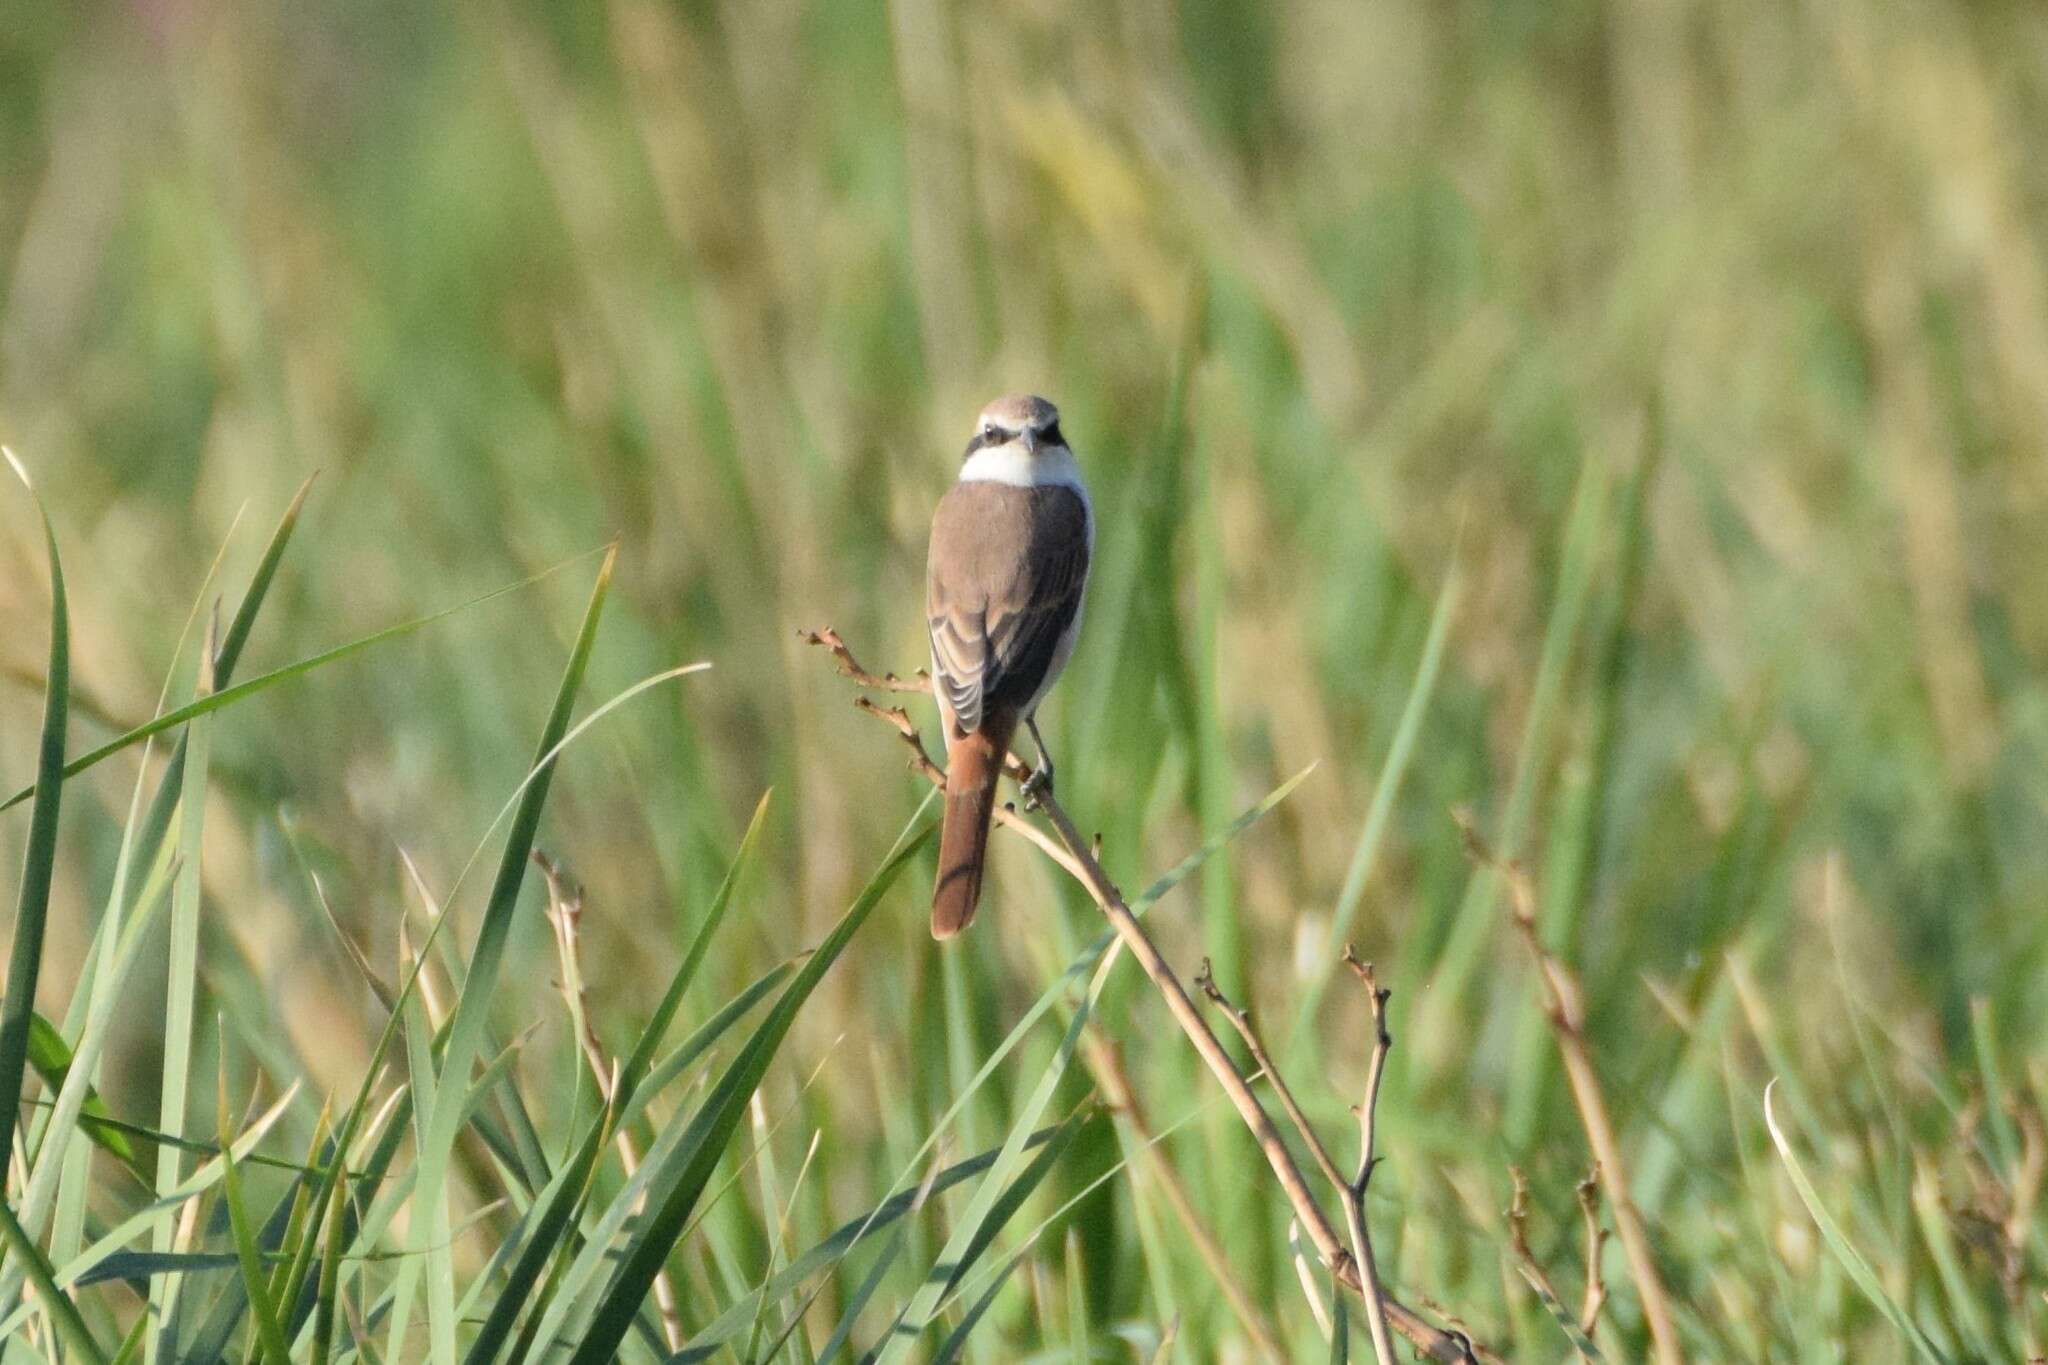 Image of Red-tailed Shrike